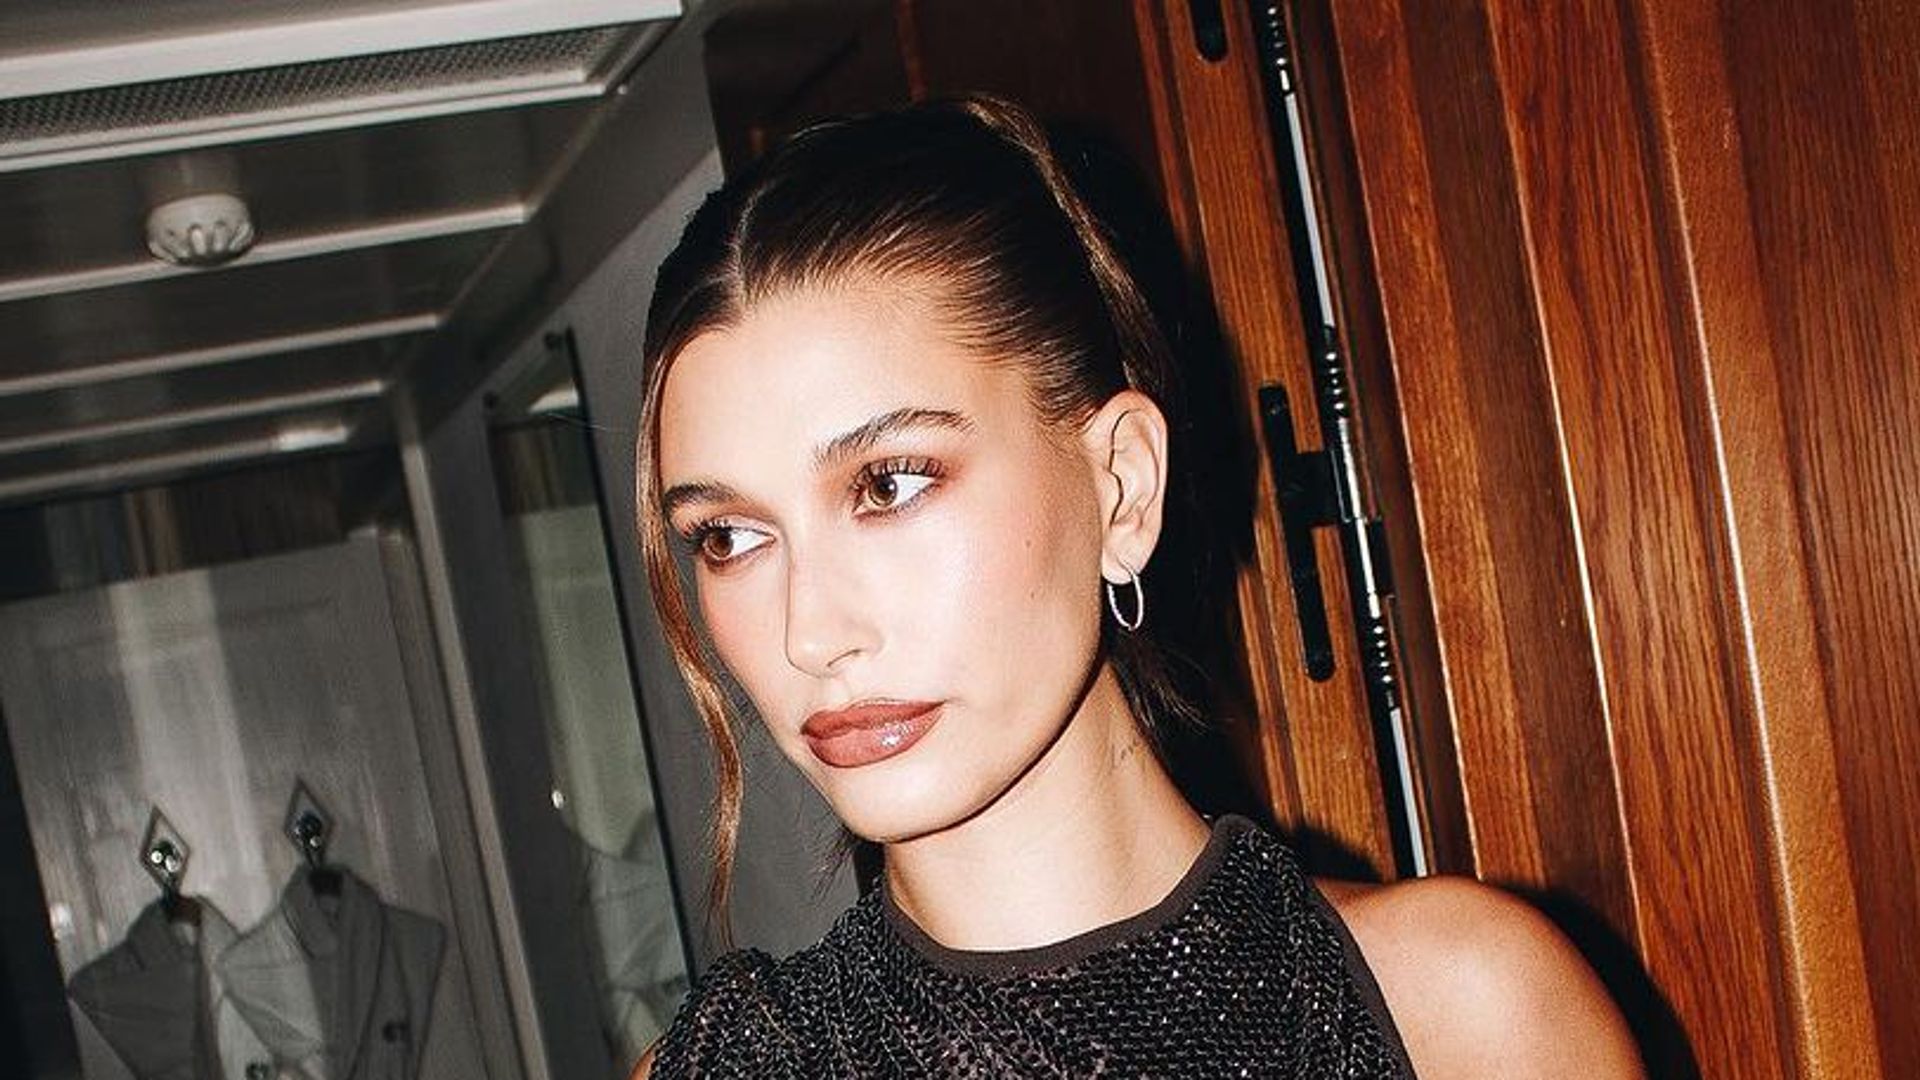 Hailey Bieber's personalised belly chain is so 2000s - we can't cope